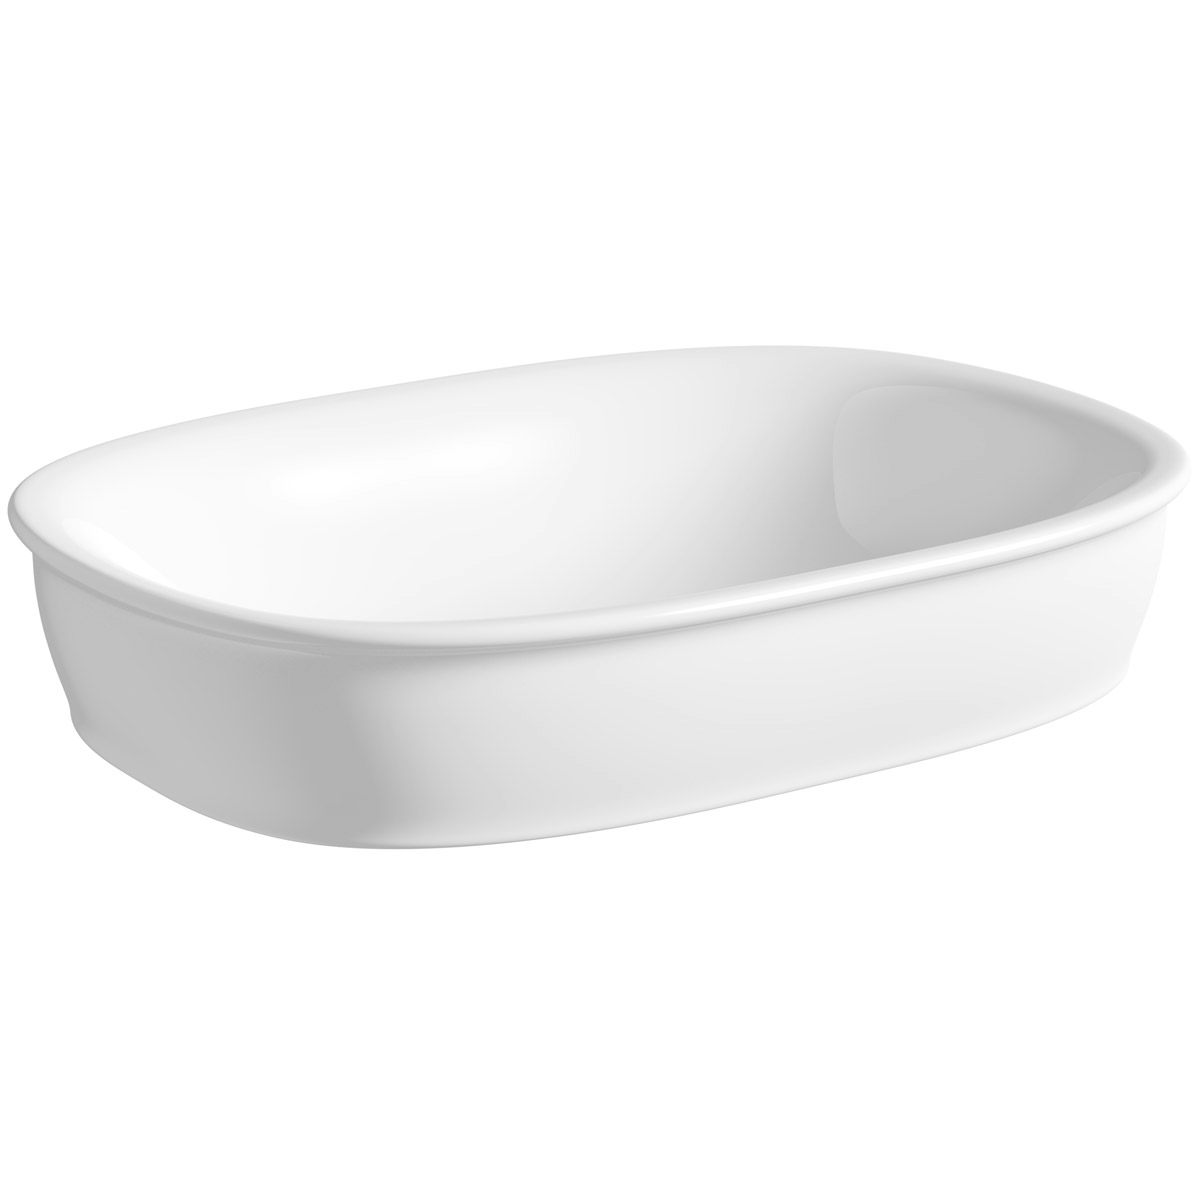 The Bath Co. Beaumont recessed countertop basin 520mm